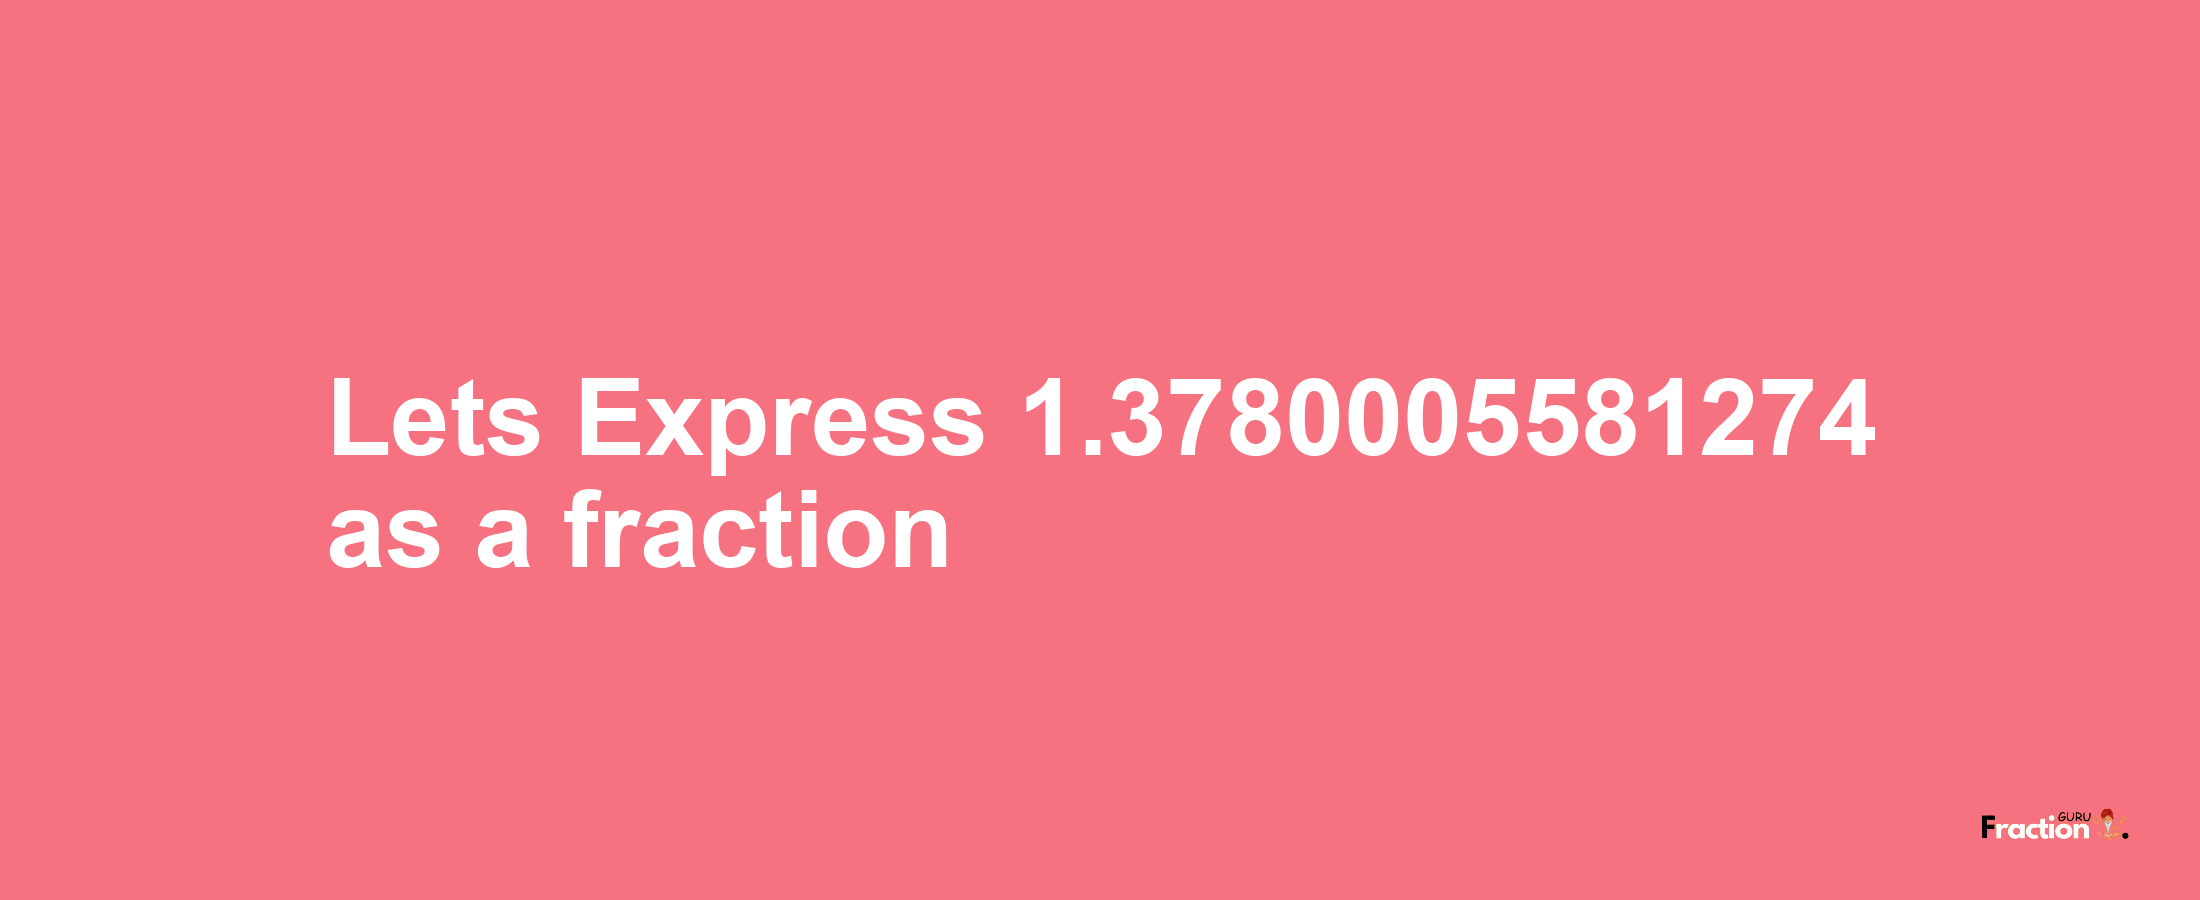 Lets Express 1.3780005581274 as afraction